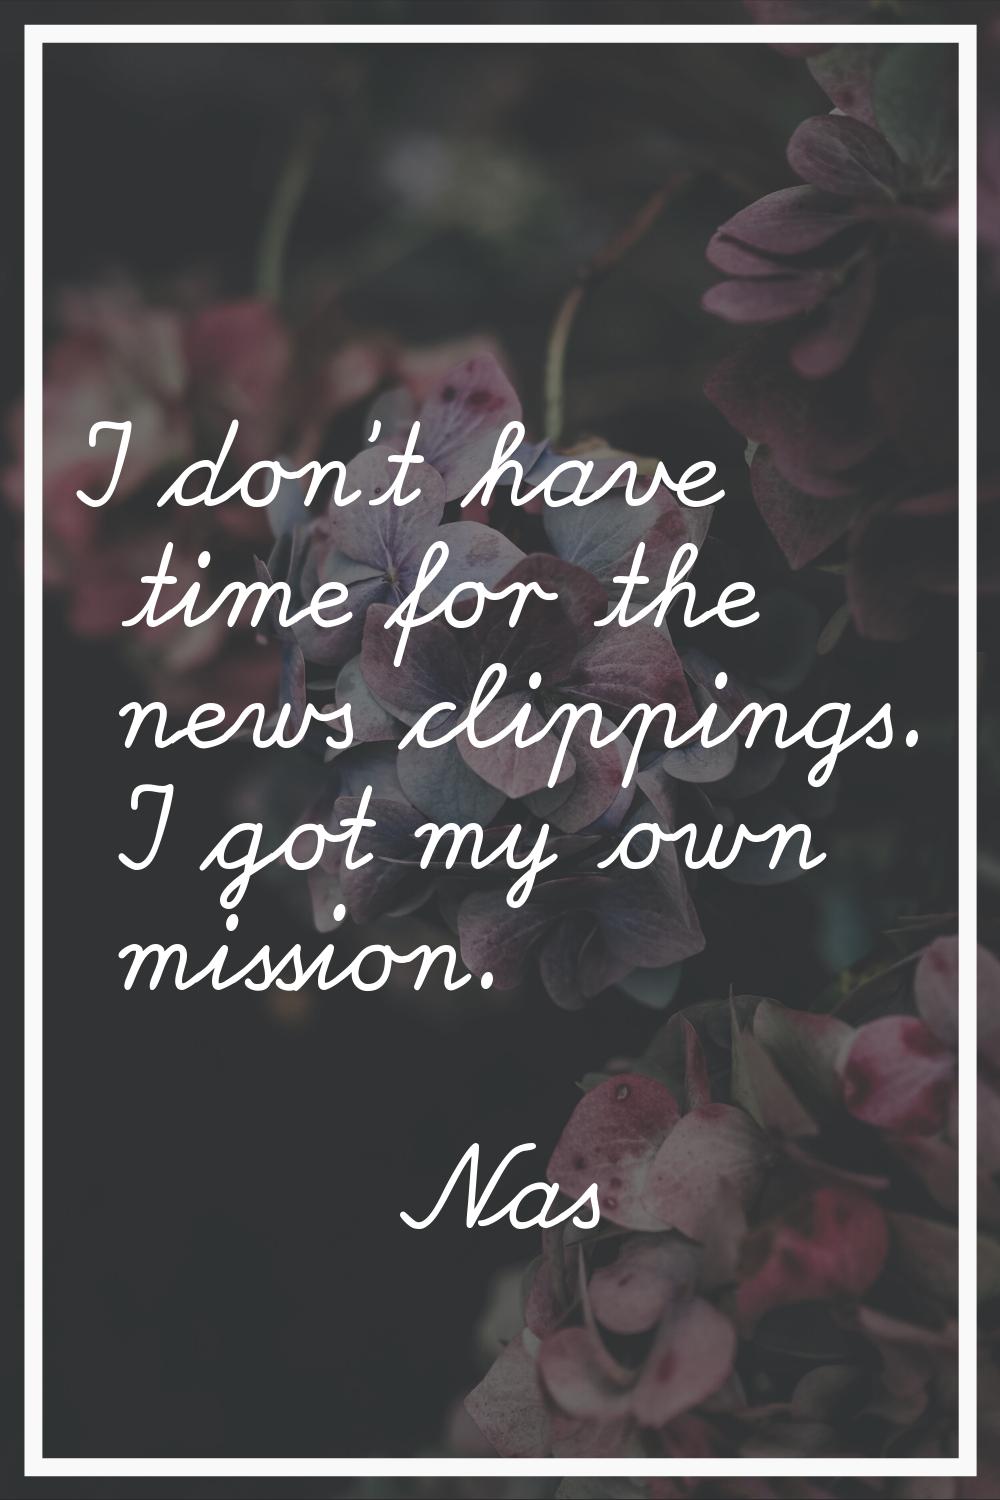 I don't have time for the news clippings. I got my own mission.